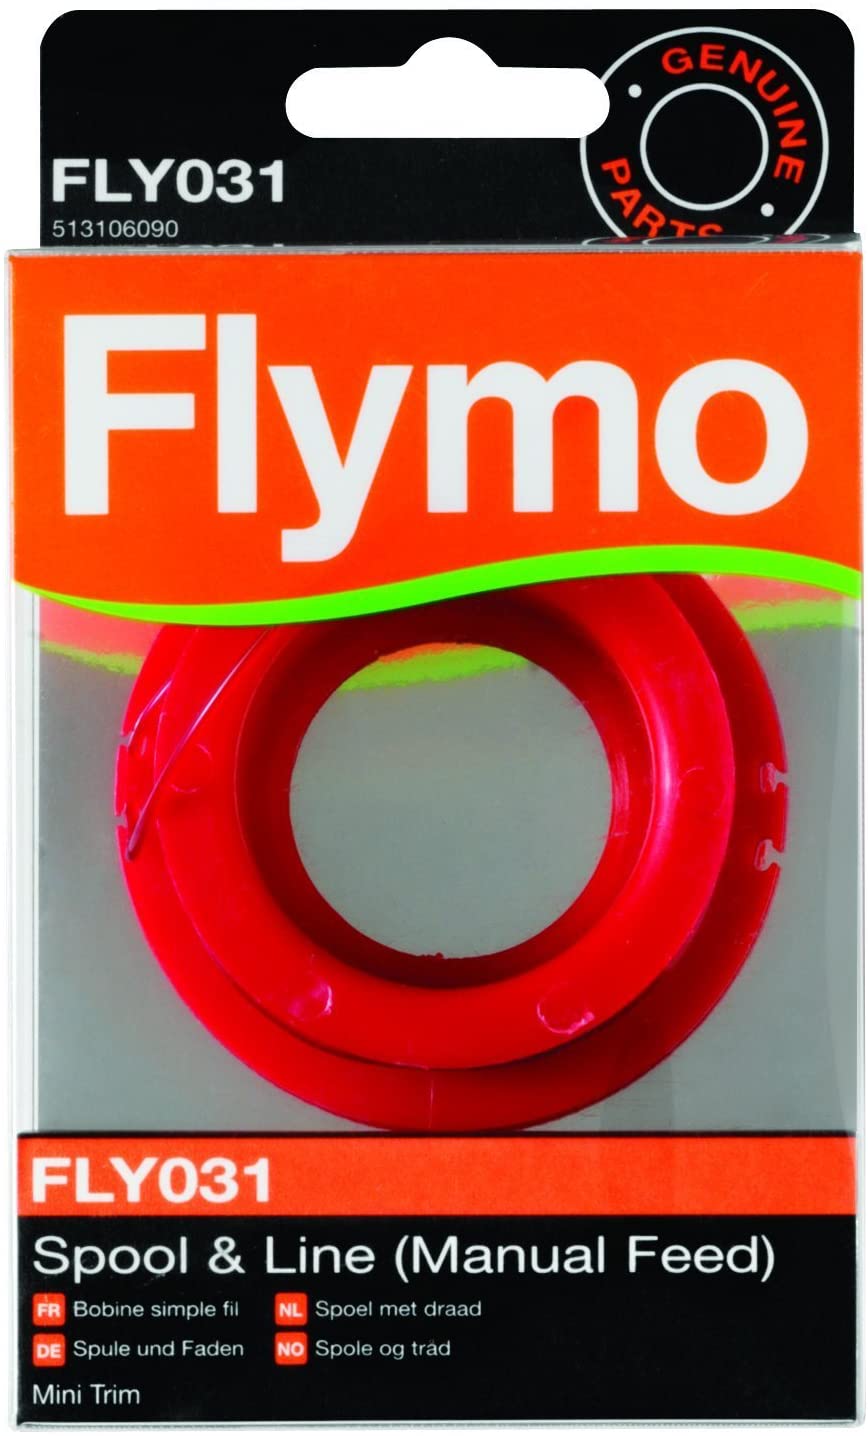 Flymo Strimmer Trimmer Mini Trim ET21 MT21 Spool and Line FLY031